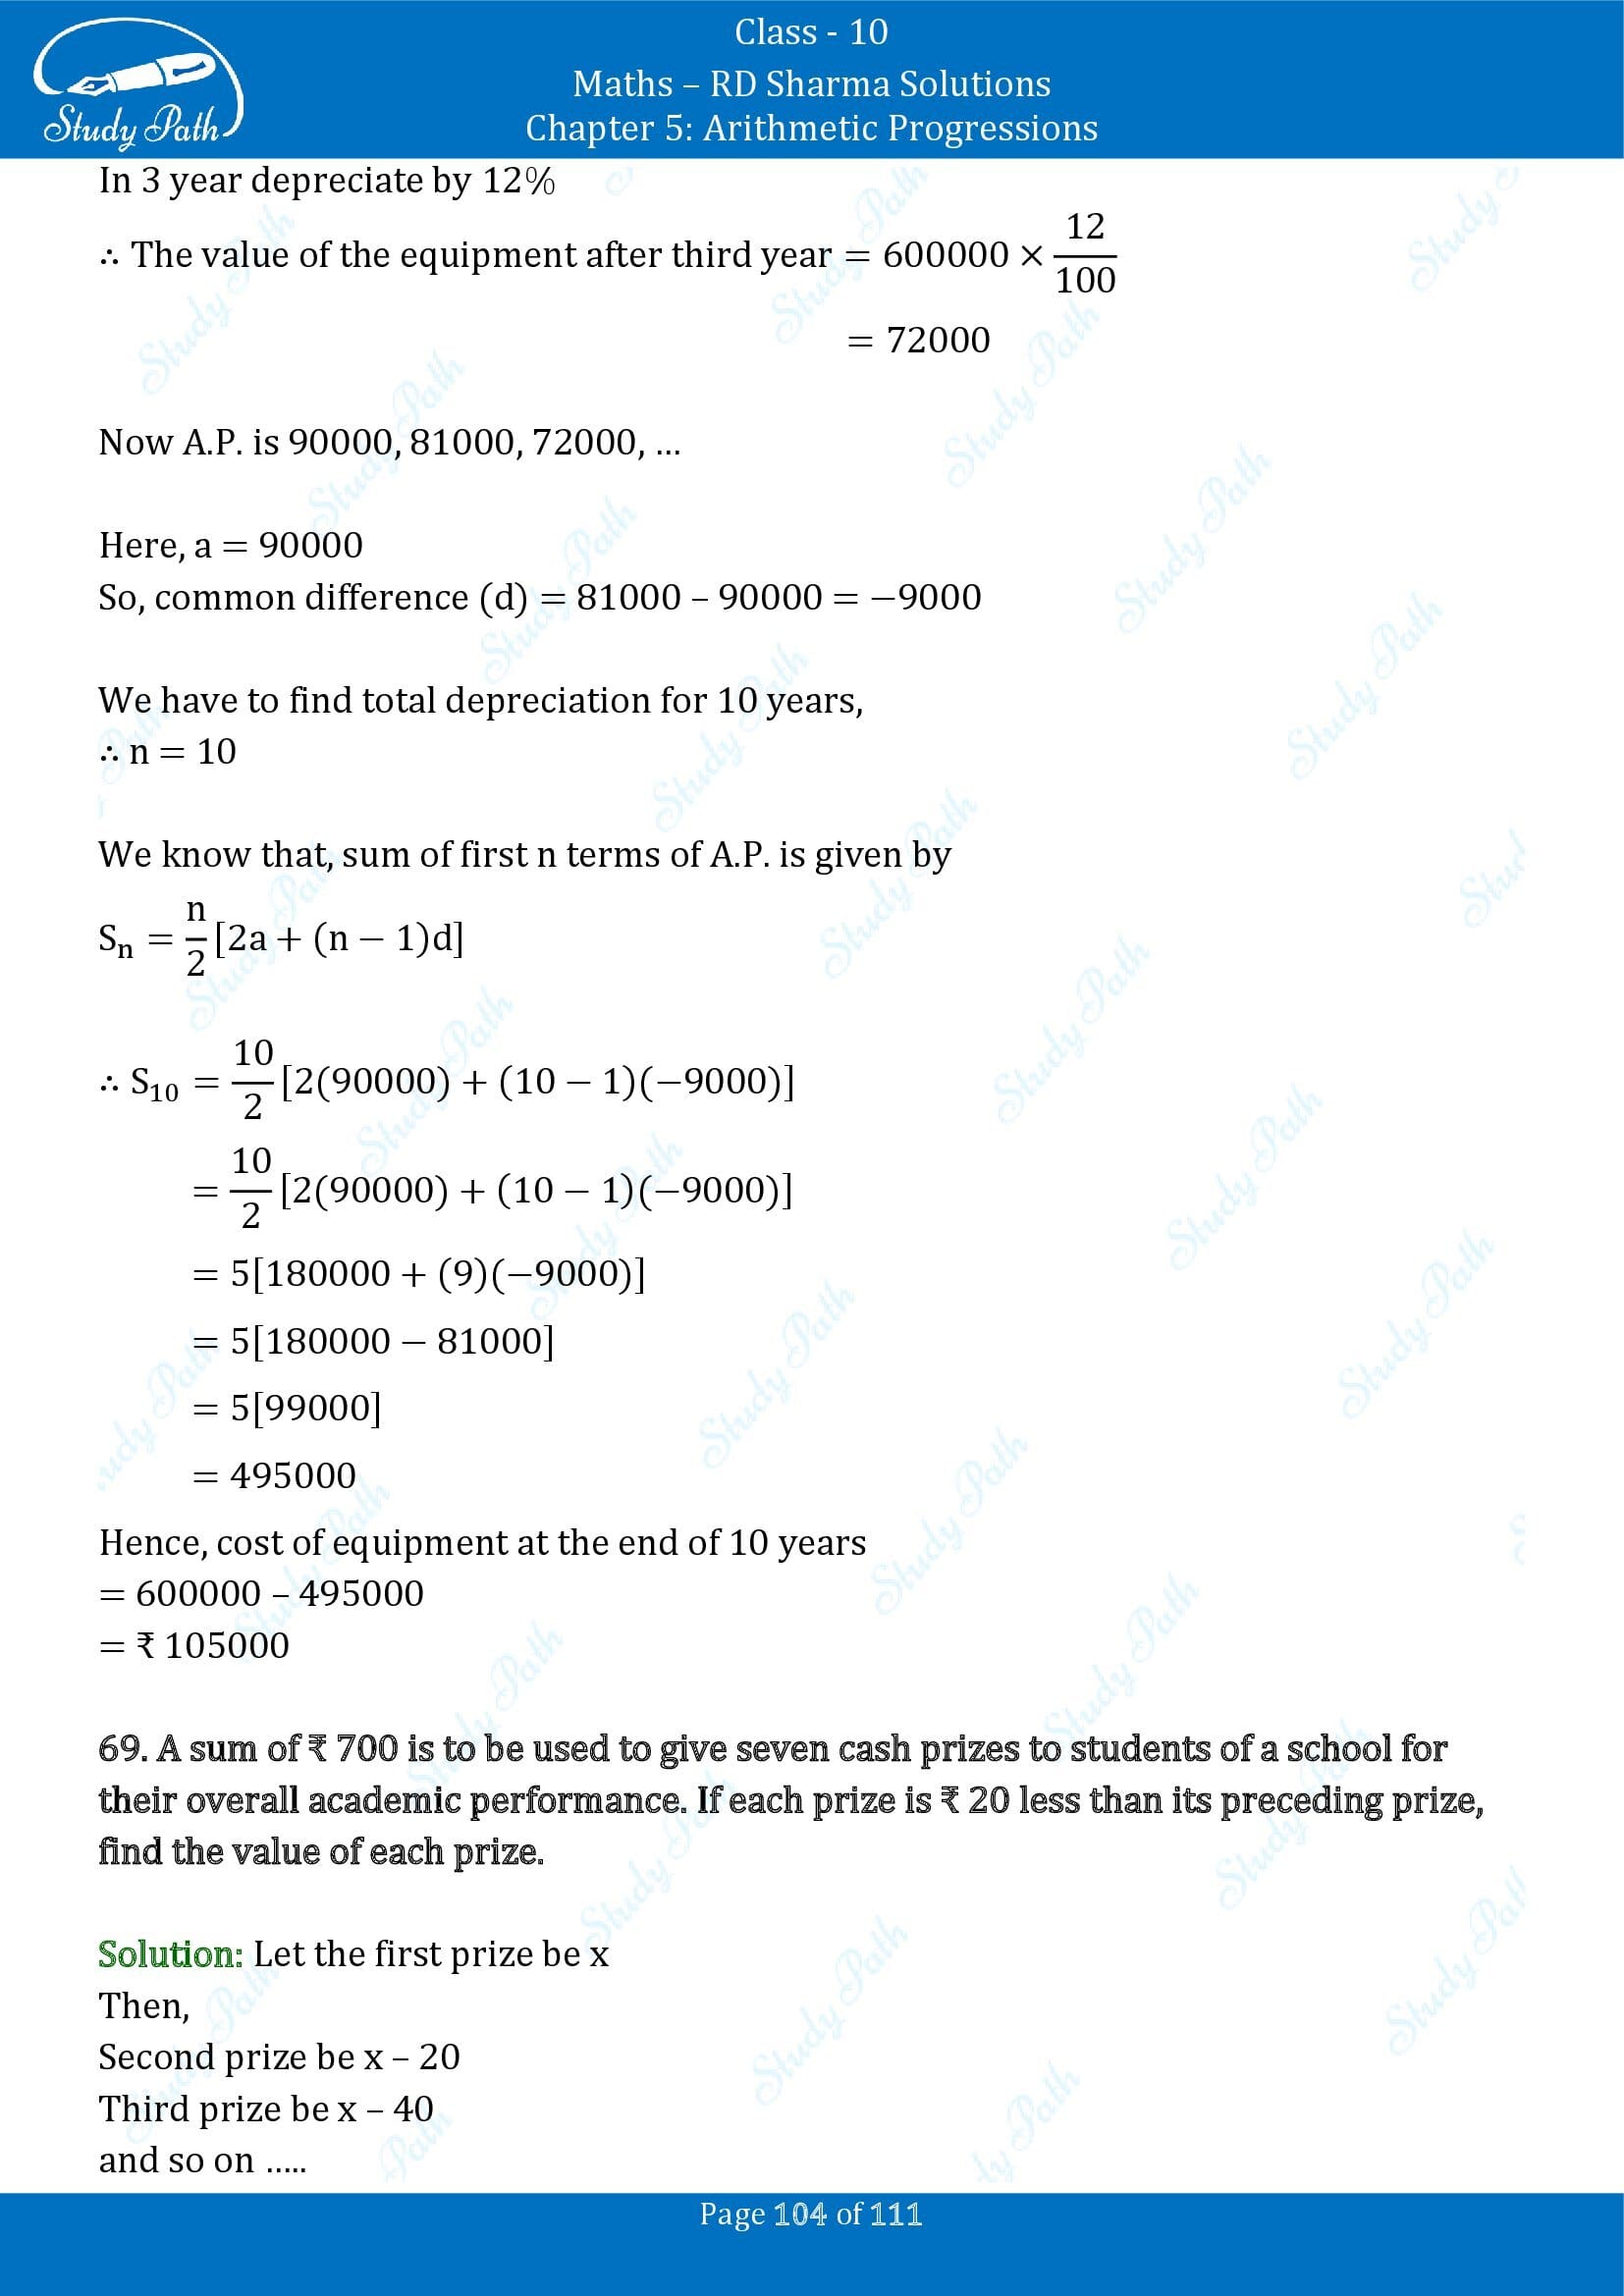 RD Sharma Solutions Class 10 Chapter 5 Arithmetic Progressions Exercise 5.6 00104